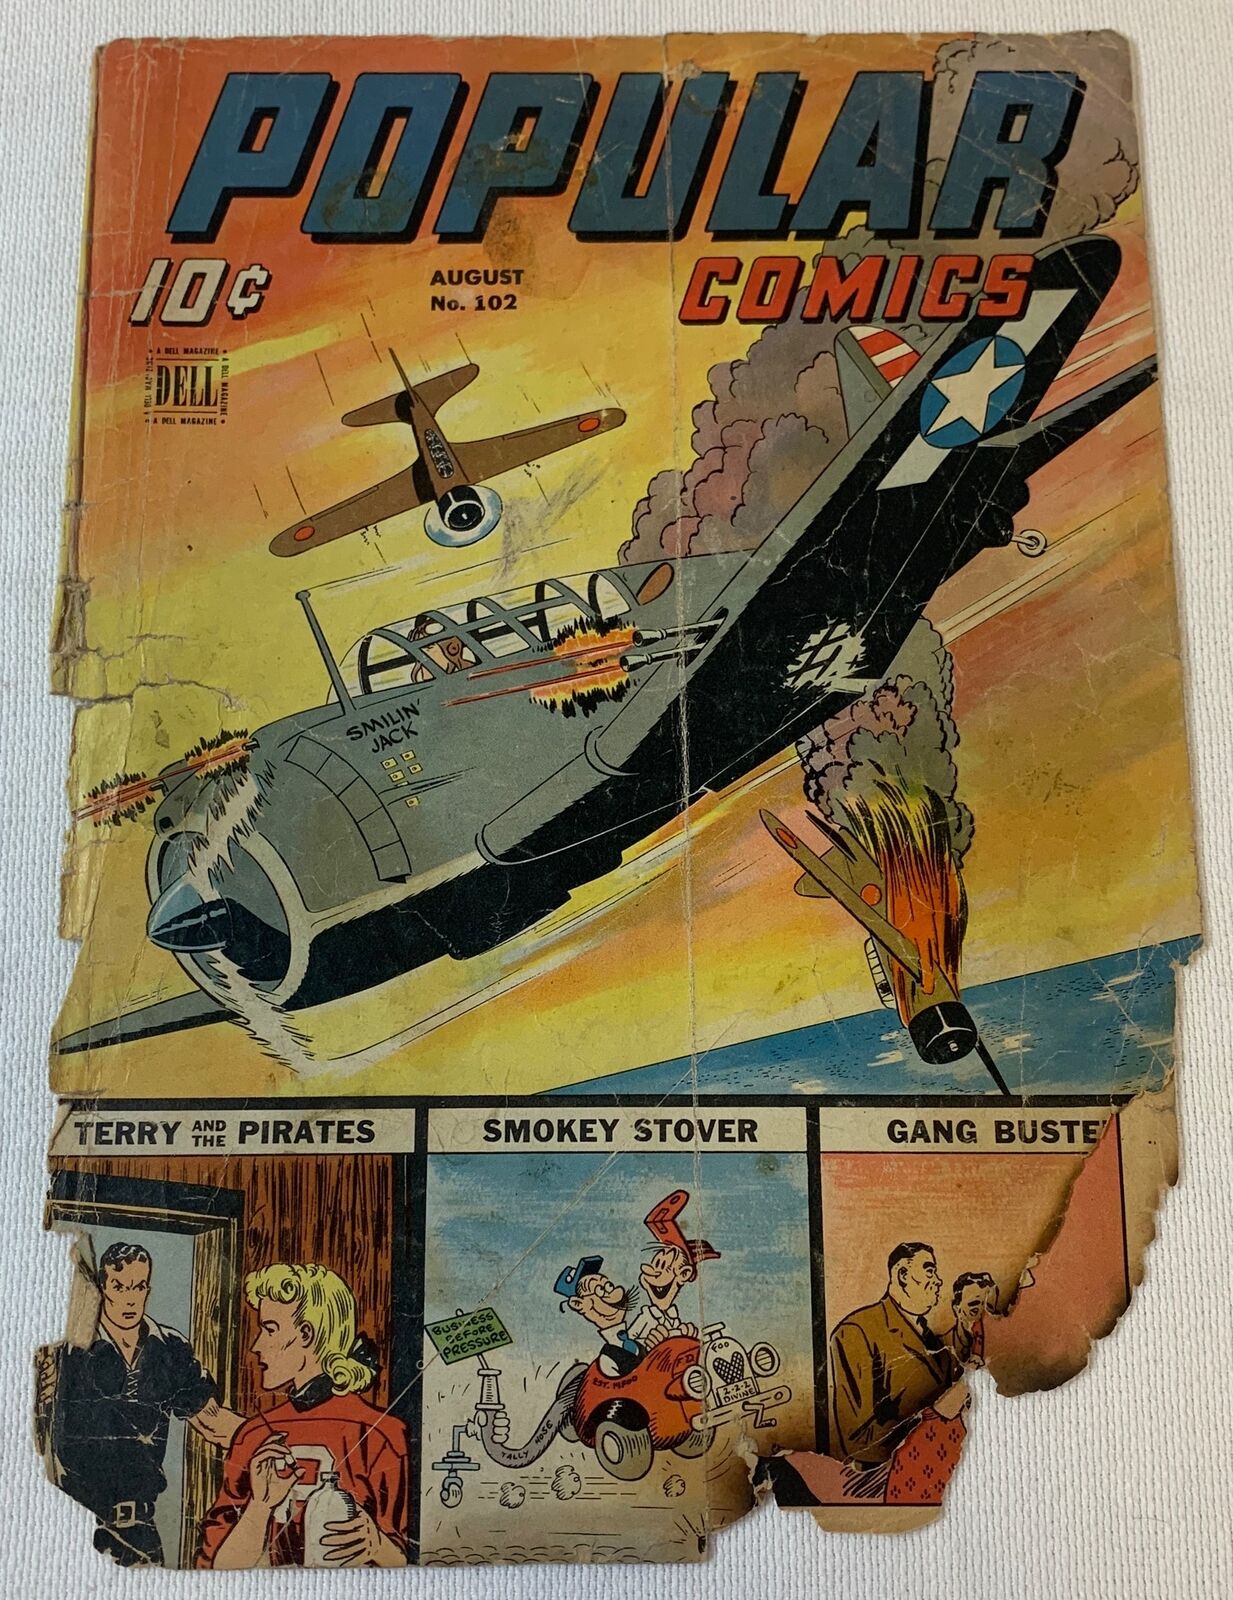 1944 POPULAR COMICS #102 ~ just the tattered cover